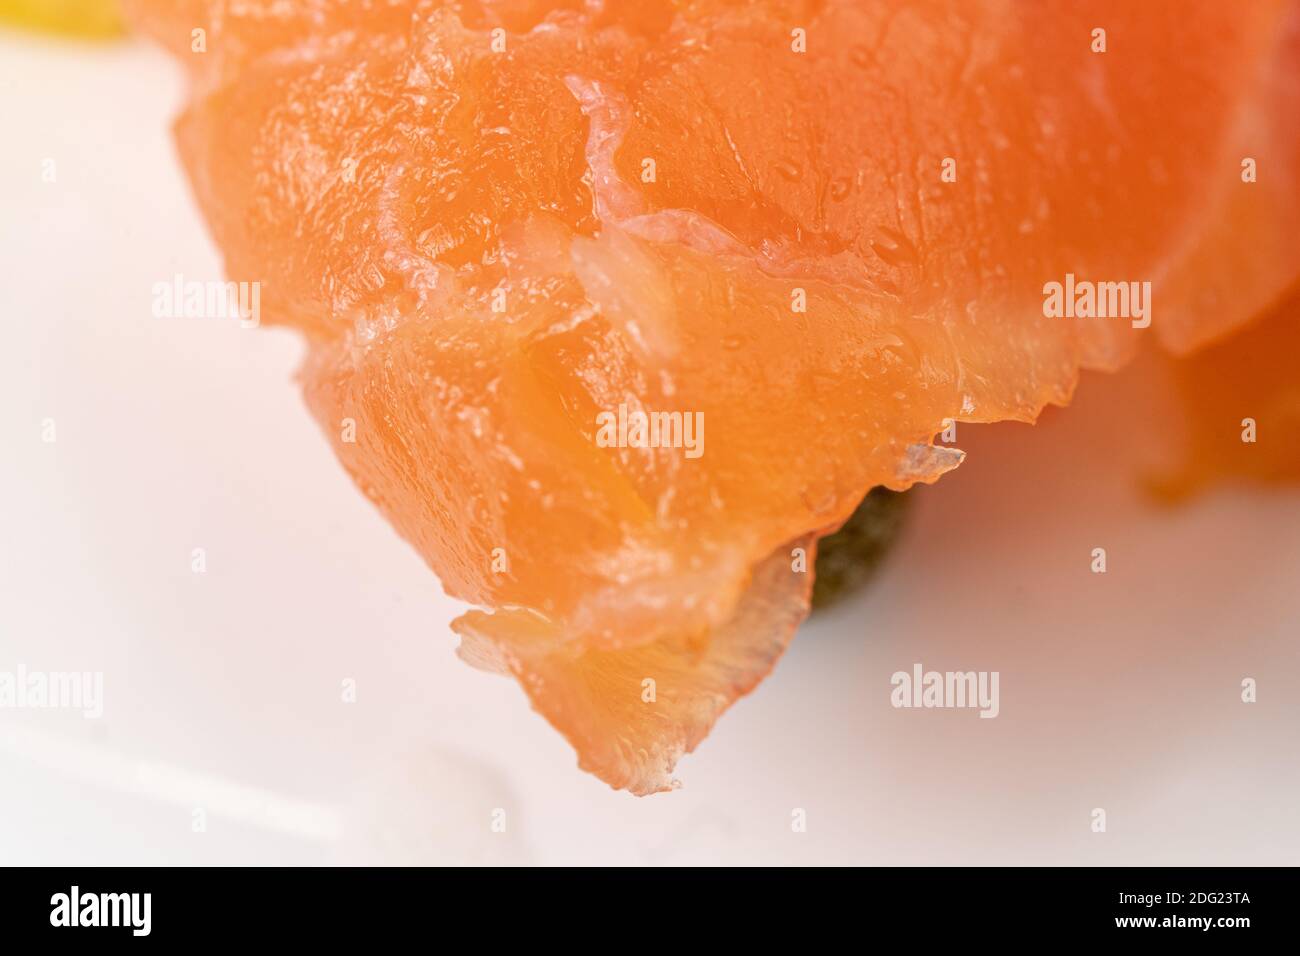 Extreme close-up of a smoked salmon food. Stock Photo